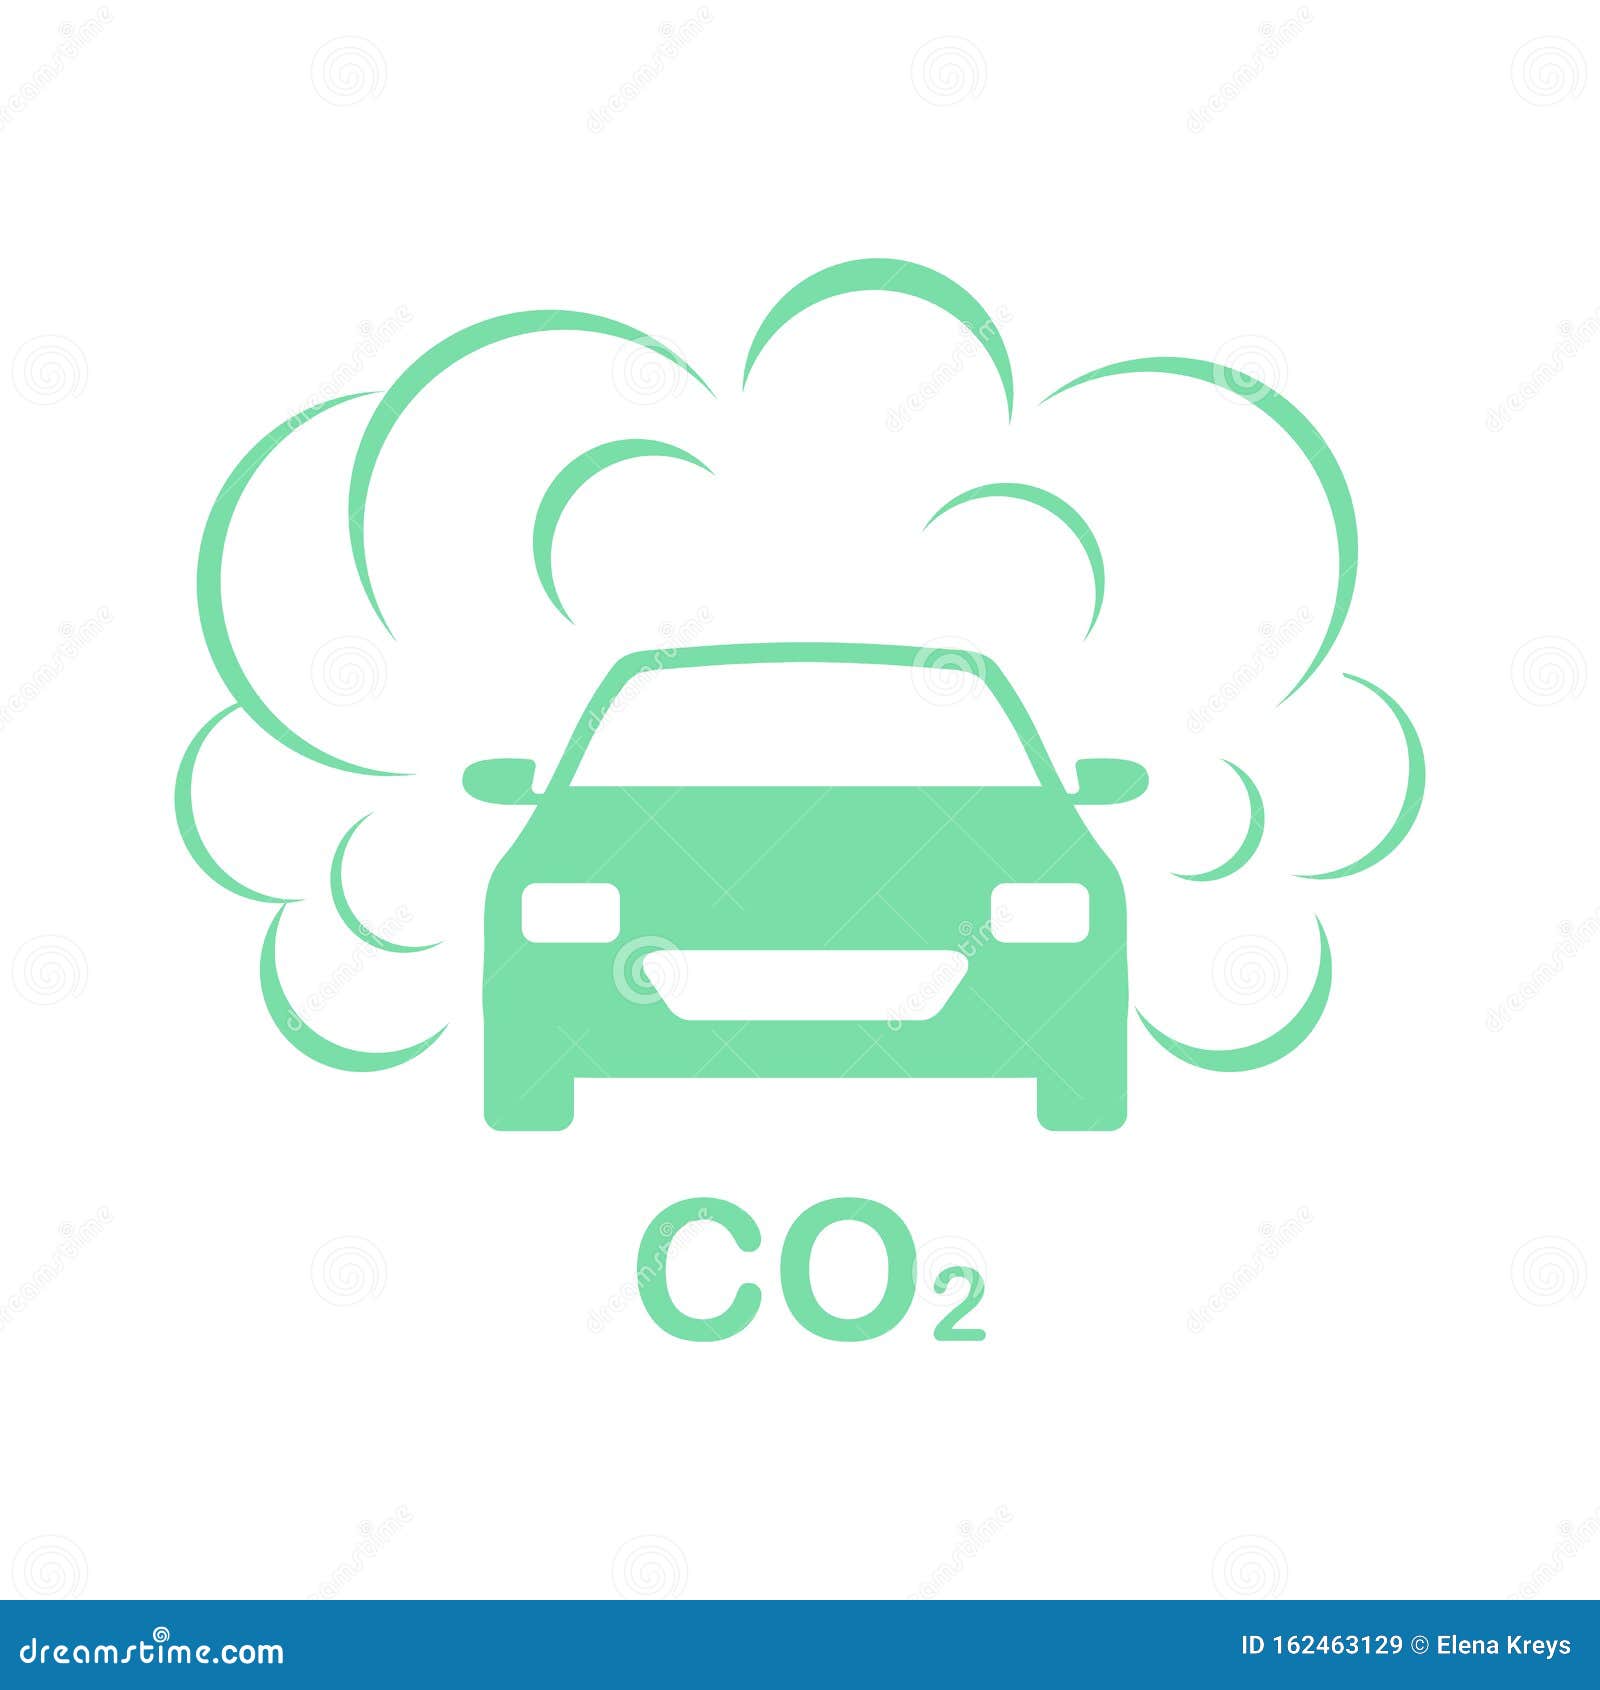 Air Pollution Transport Ecology Smog Exhaust Smoke Stock Vector ...